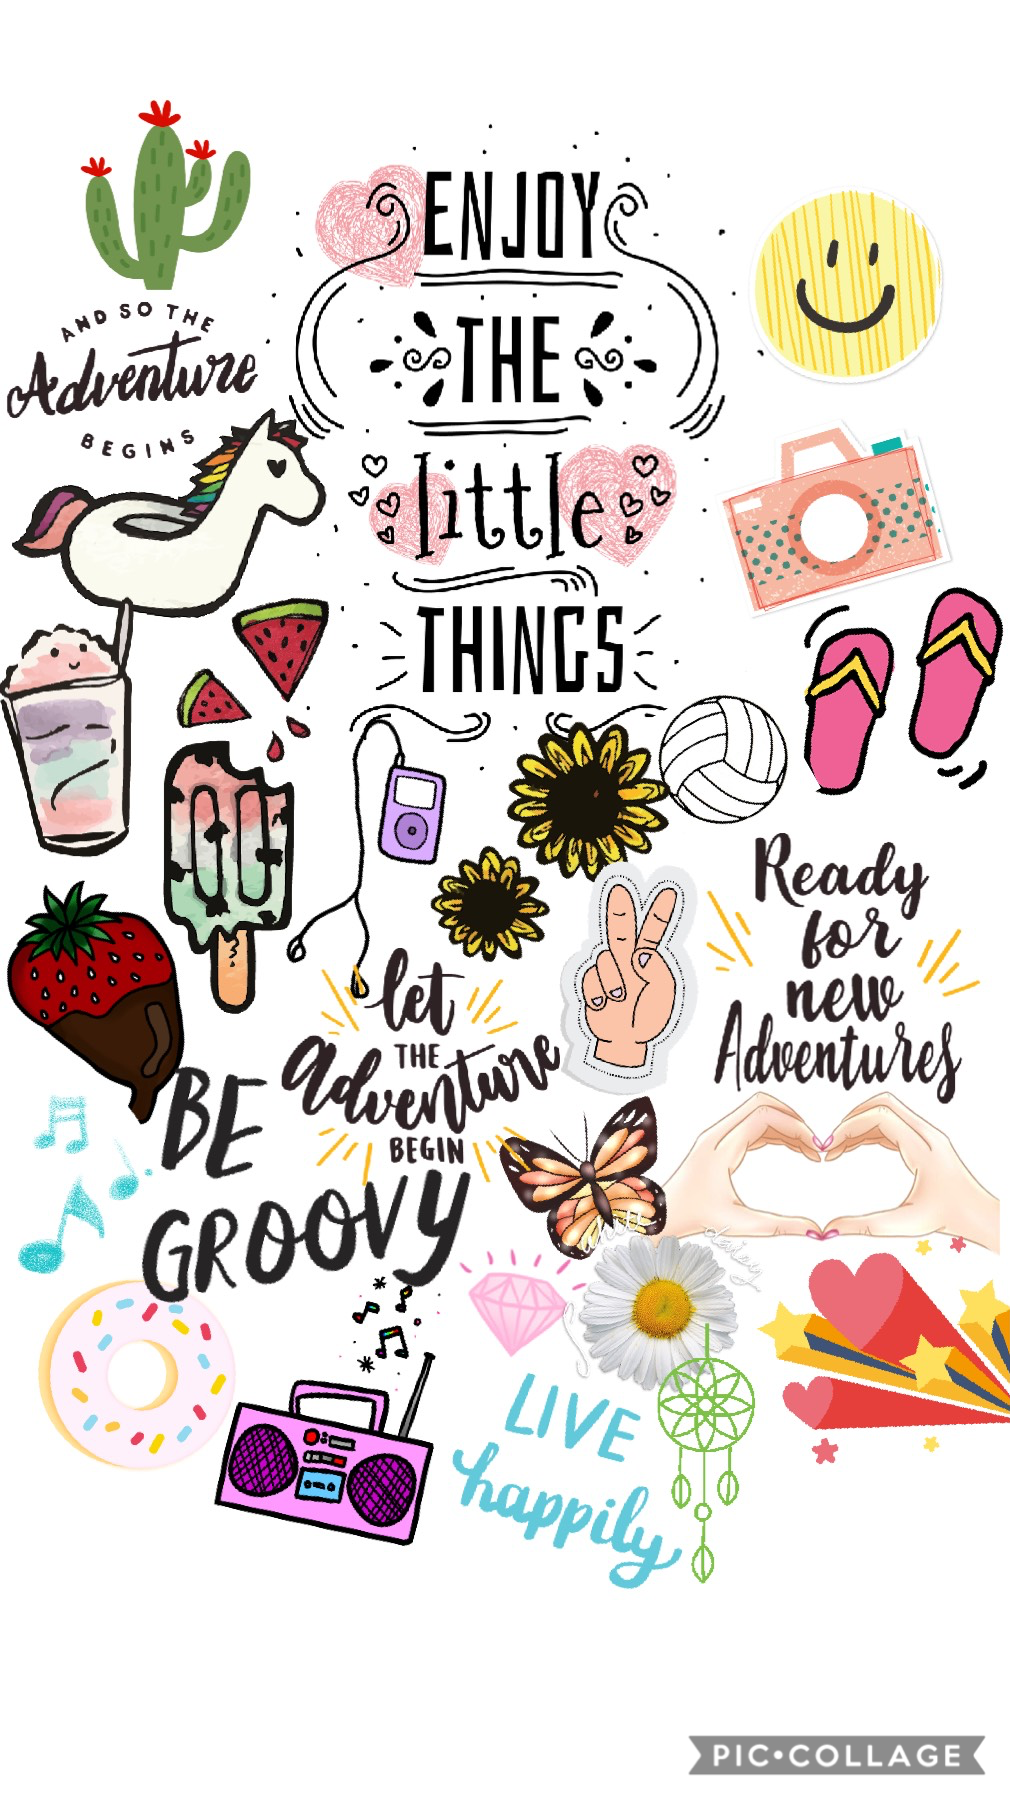 Enjoy the little things. Make a collage about the little things that you like to do and post here. Can’t wait to see what you guys do for your collage! Thanks! 😉